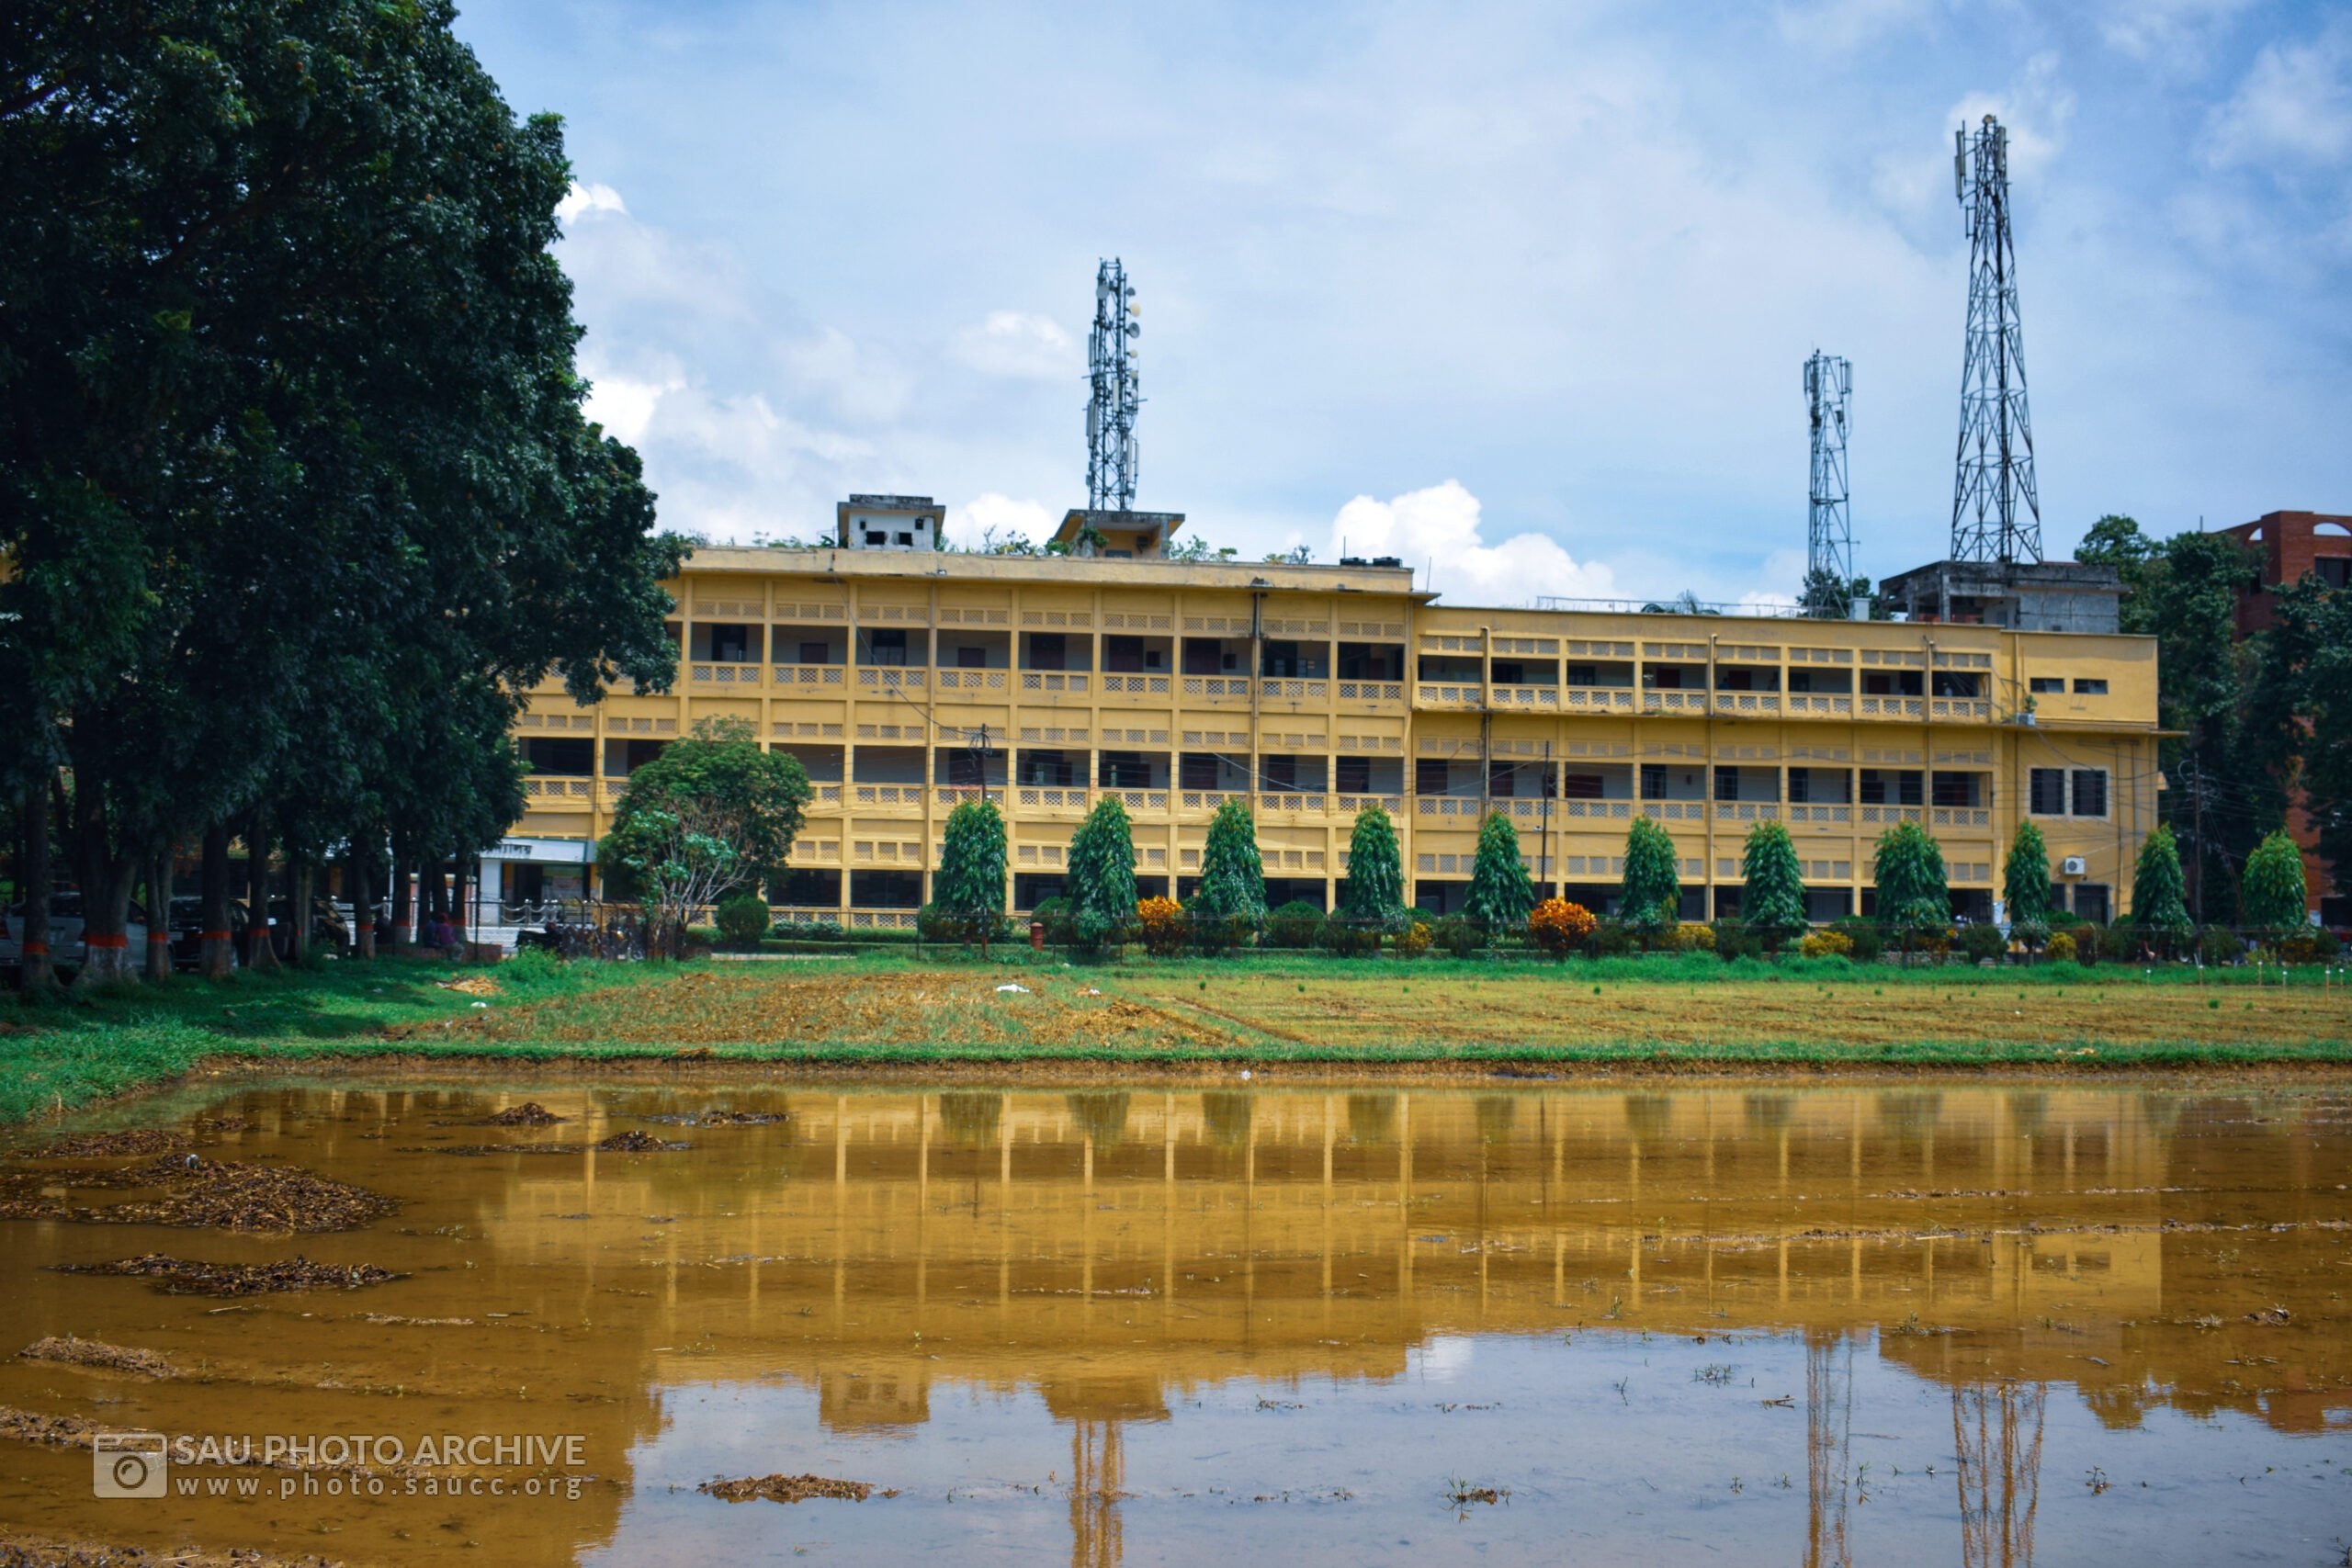 A Reflection photo is captured by Ahmed Imran Halimi at Sher-e-Bangla Agricultural University titled Reflection of Academic Building